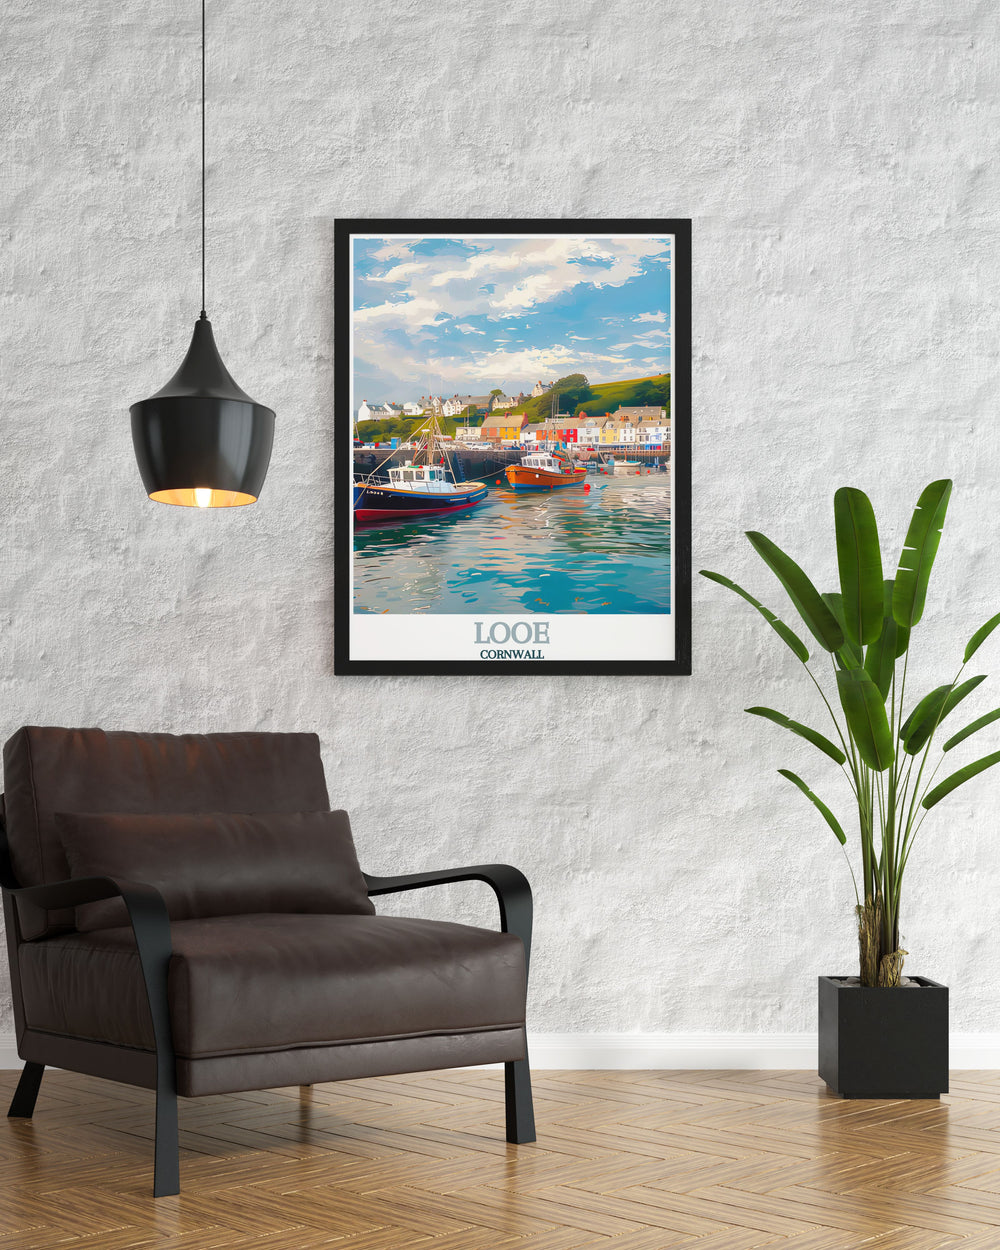 Beautiful Looe Harbour modern prints showcasing the picturesque scenery of Looe Cornwall these travel prints bring the tranquil beauty of Looe Harbour into your living space making them a stunning addition to any Cornwall home decor collection.